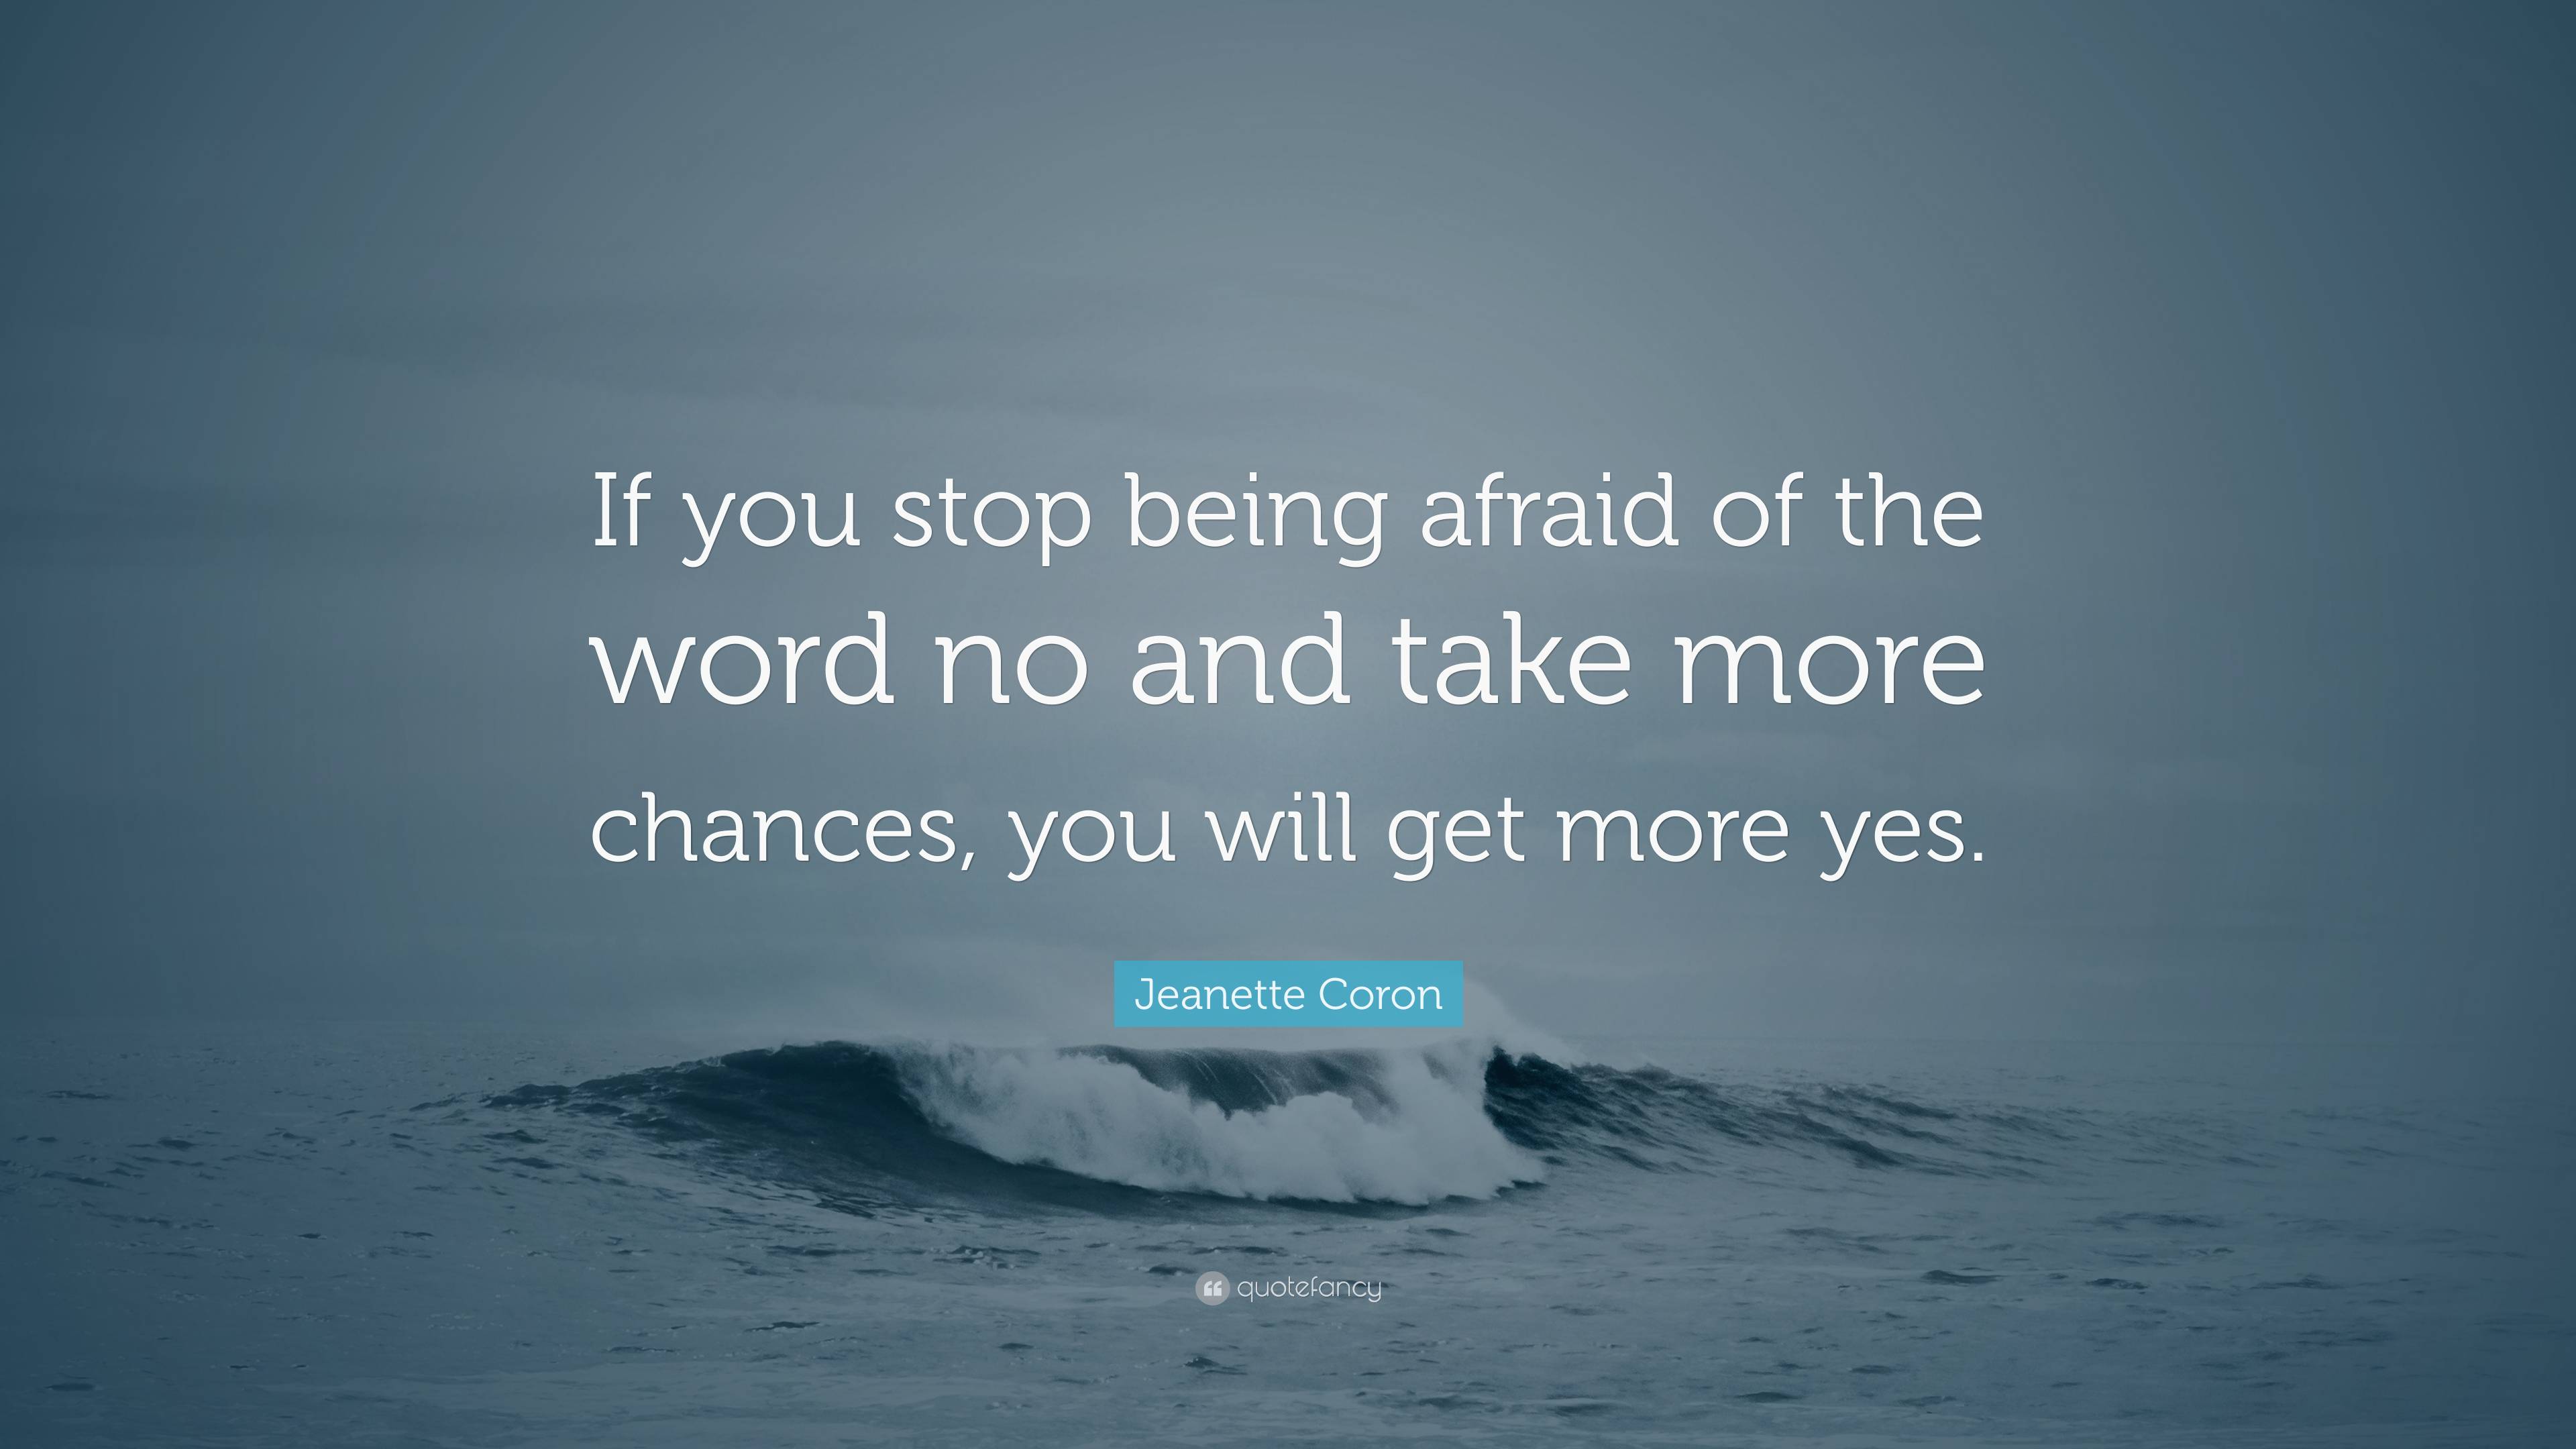 Jeanette Coron Quote: “If you stop being afraid of the word no and take ...